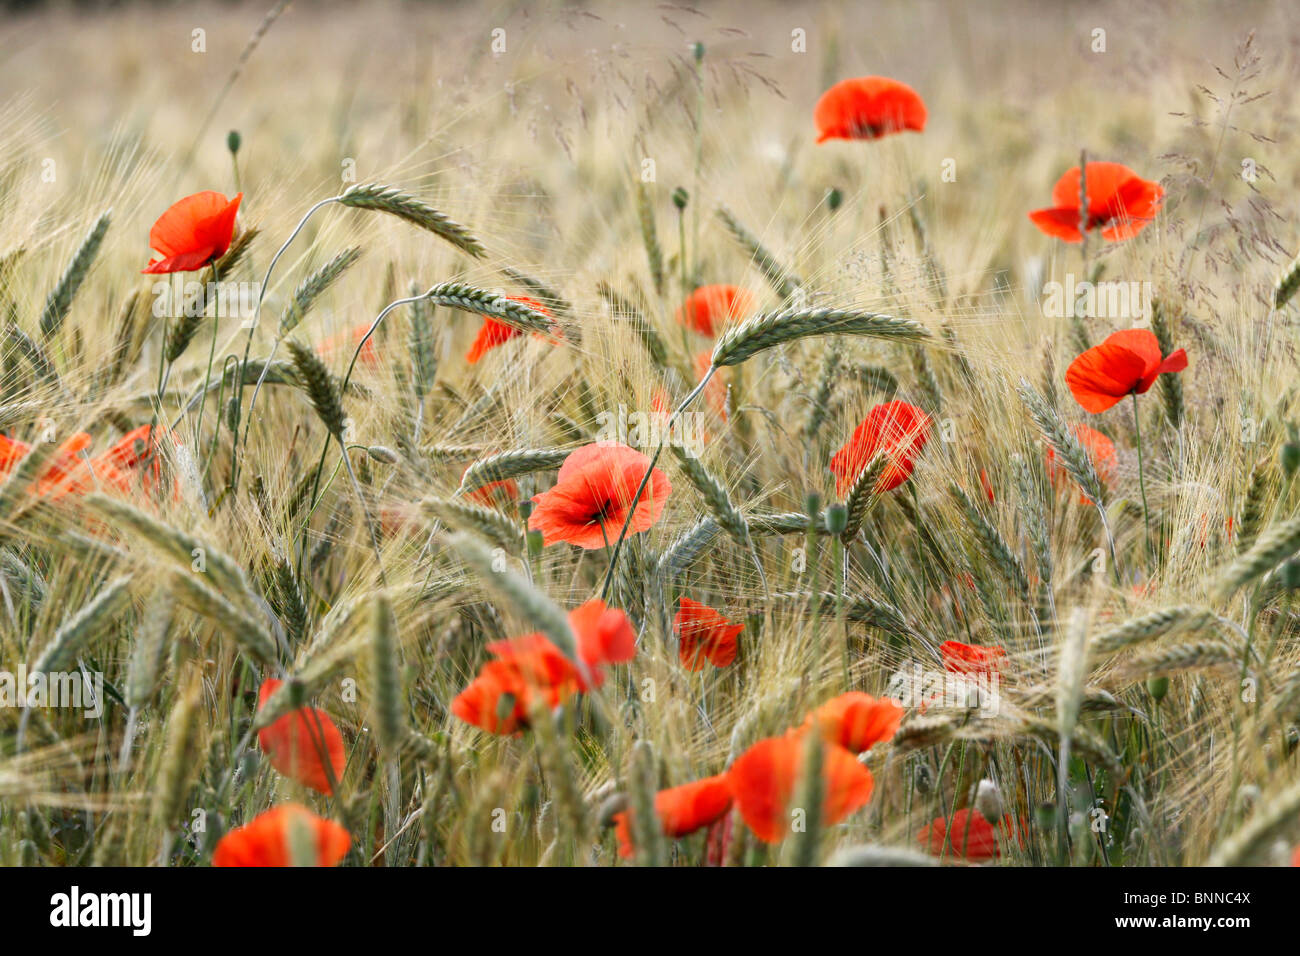 Red poppies growing in the cereal crop Stock Photo